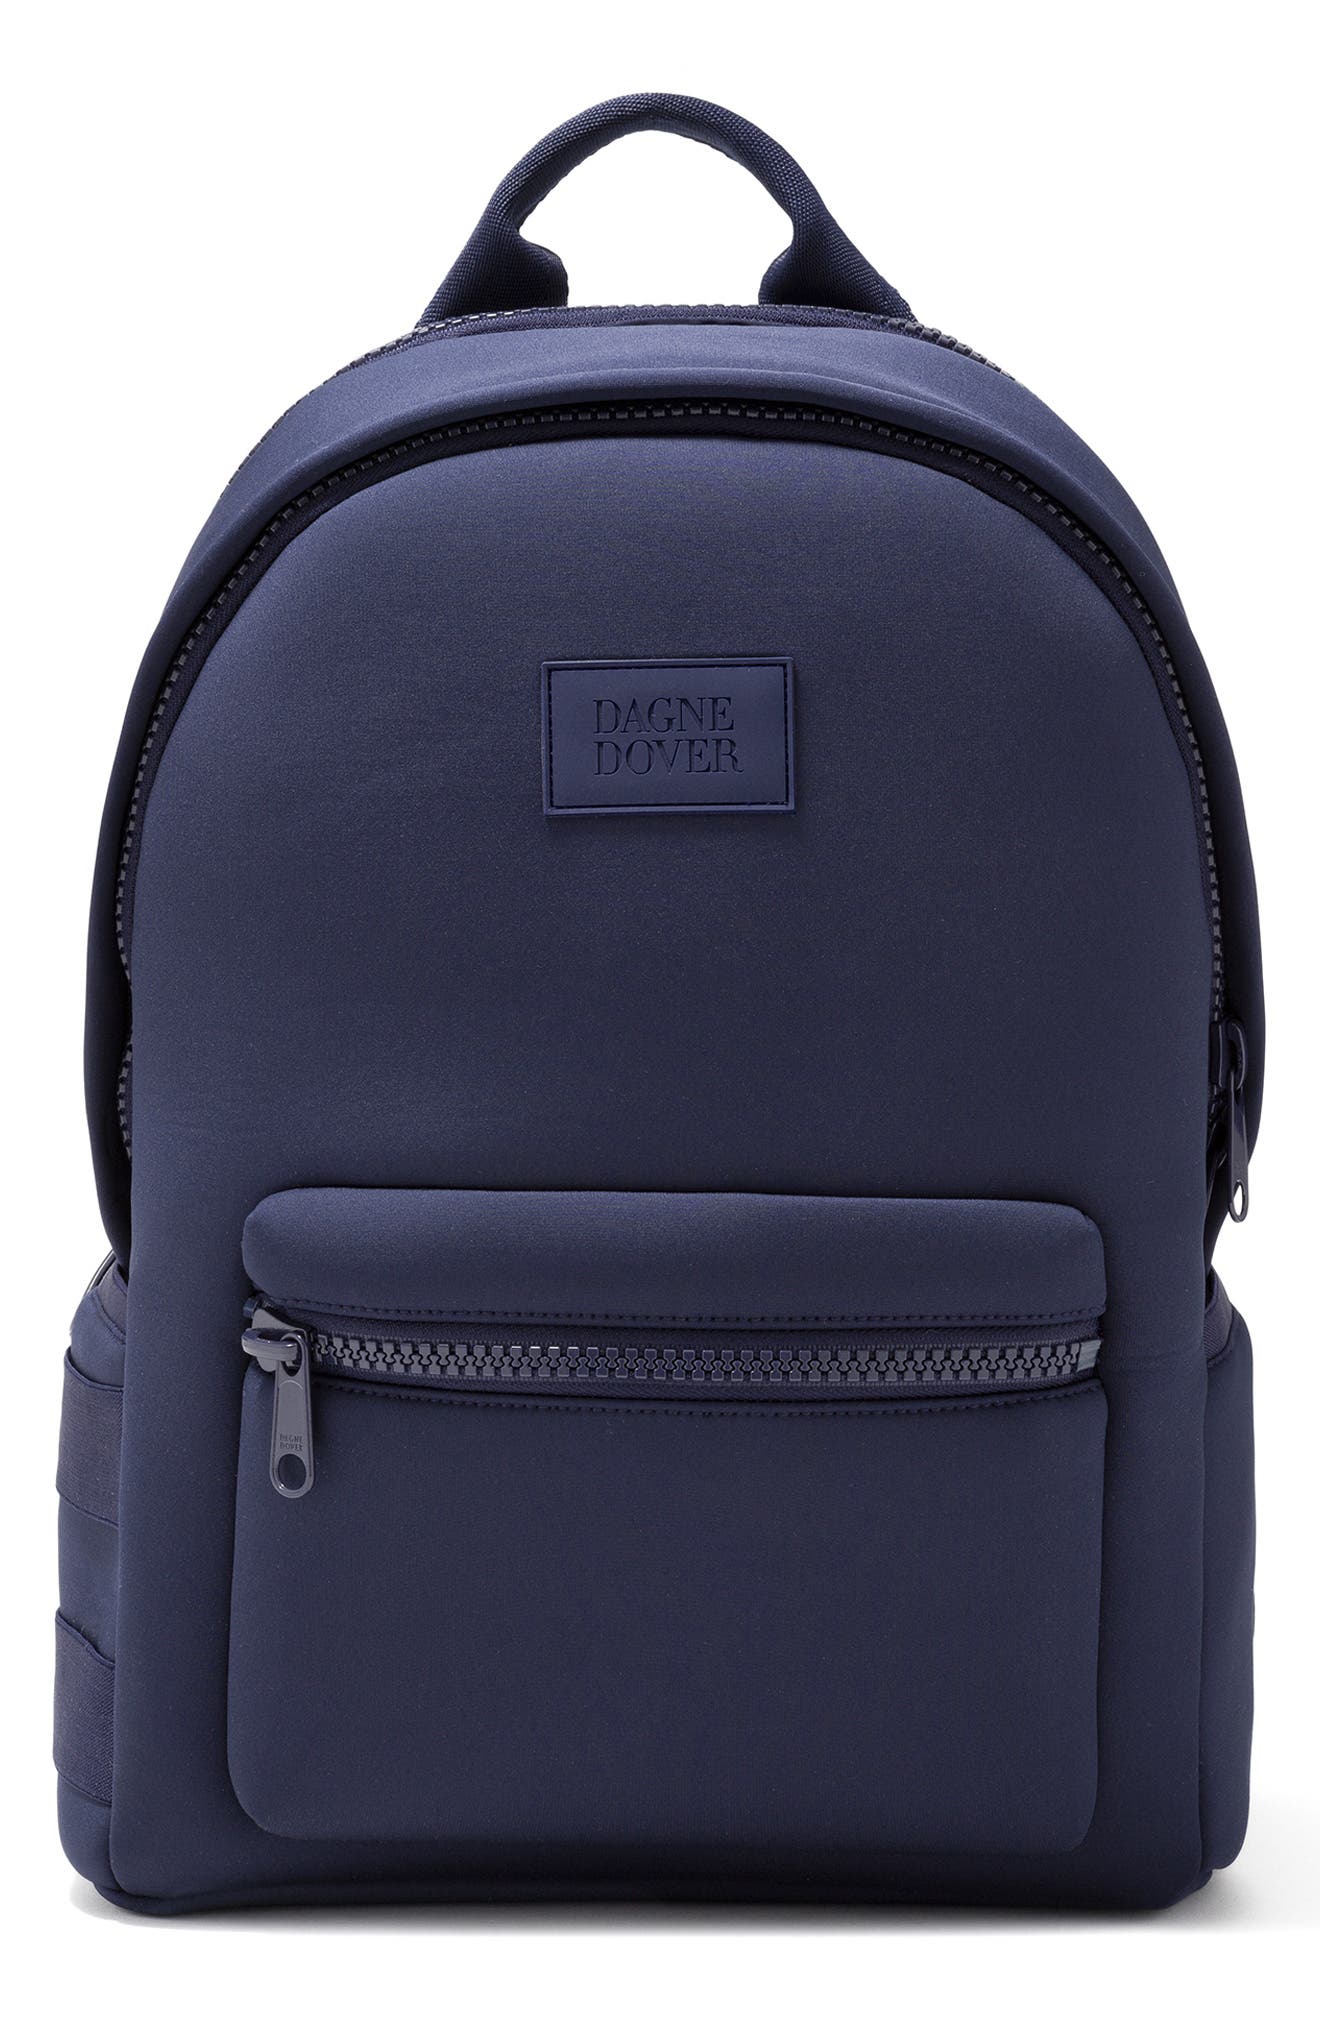 Dagne Dover Small Landon Carryall Review + Pack + On The Body